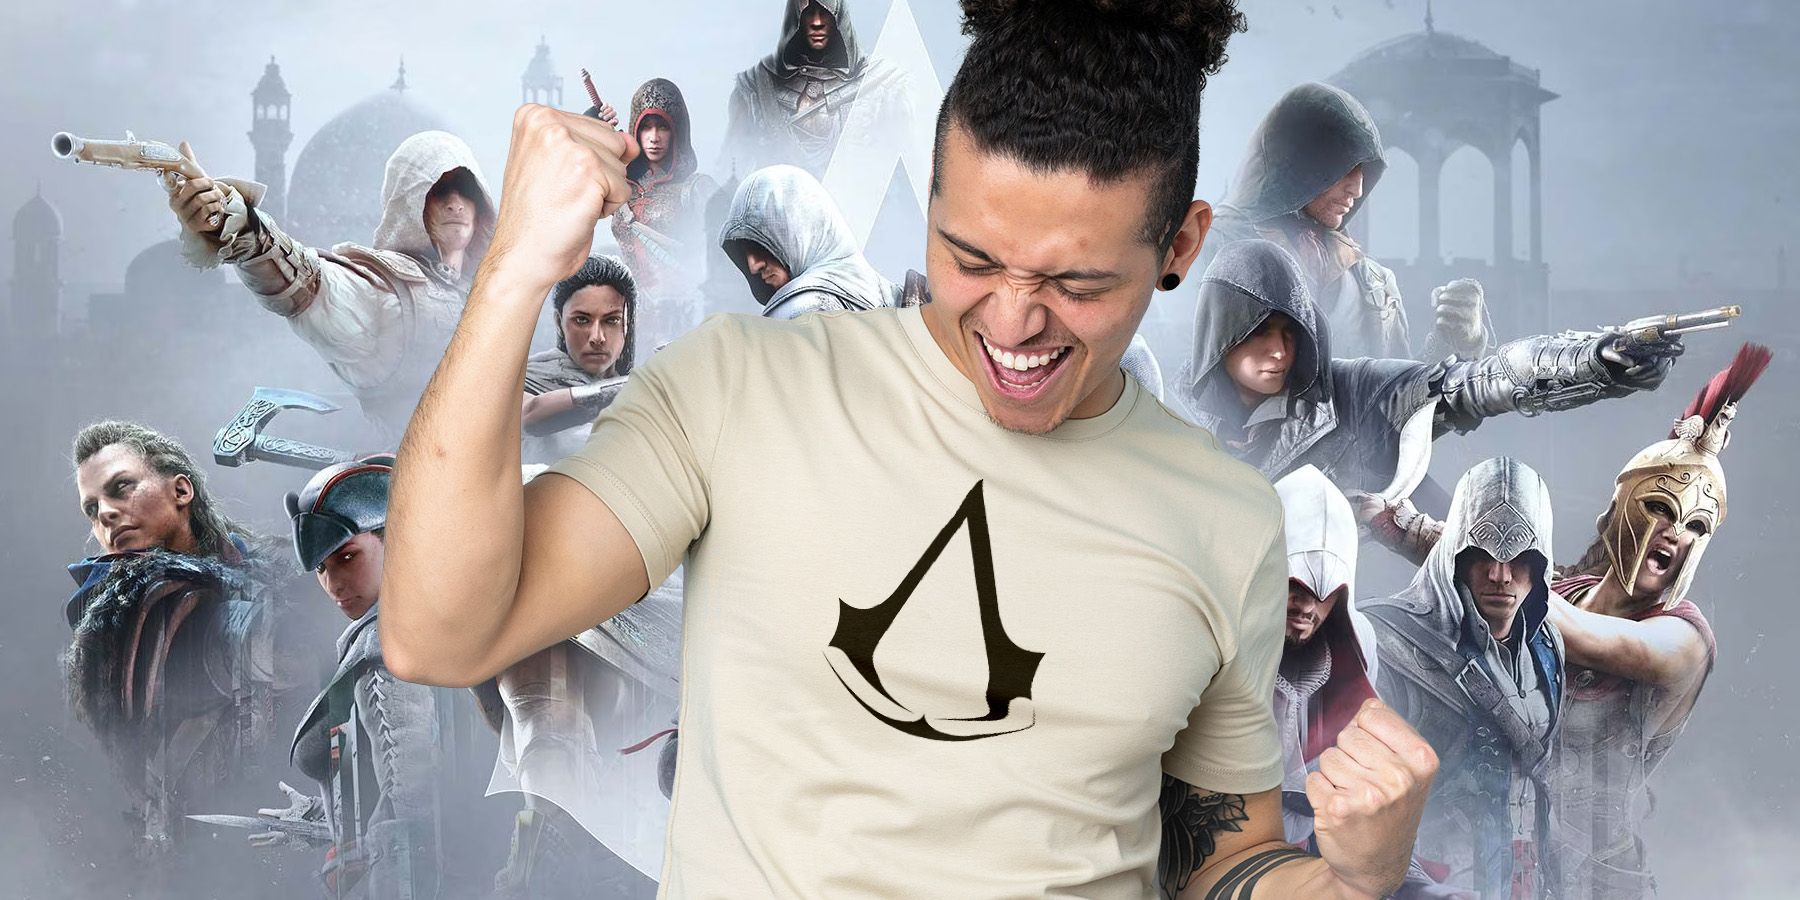 Xbox Fans Repulsed By Mid-Game Ubisoft Advert For Assassin's Creed